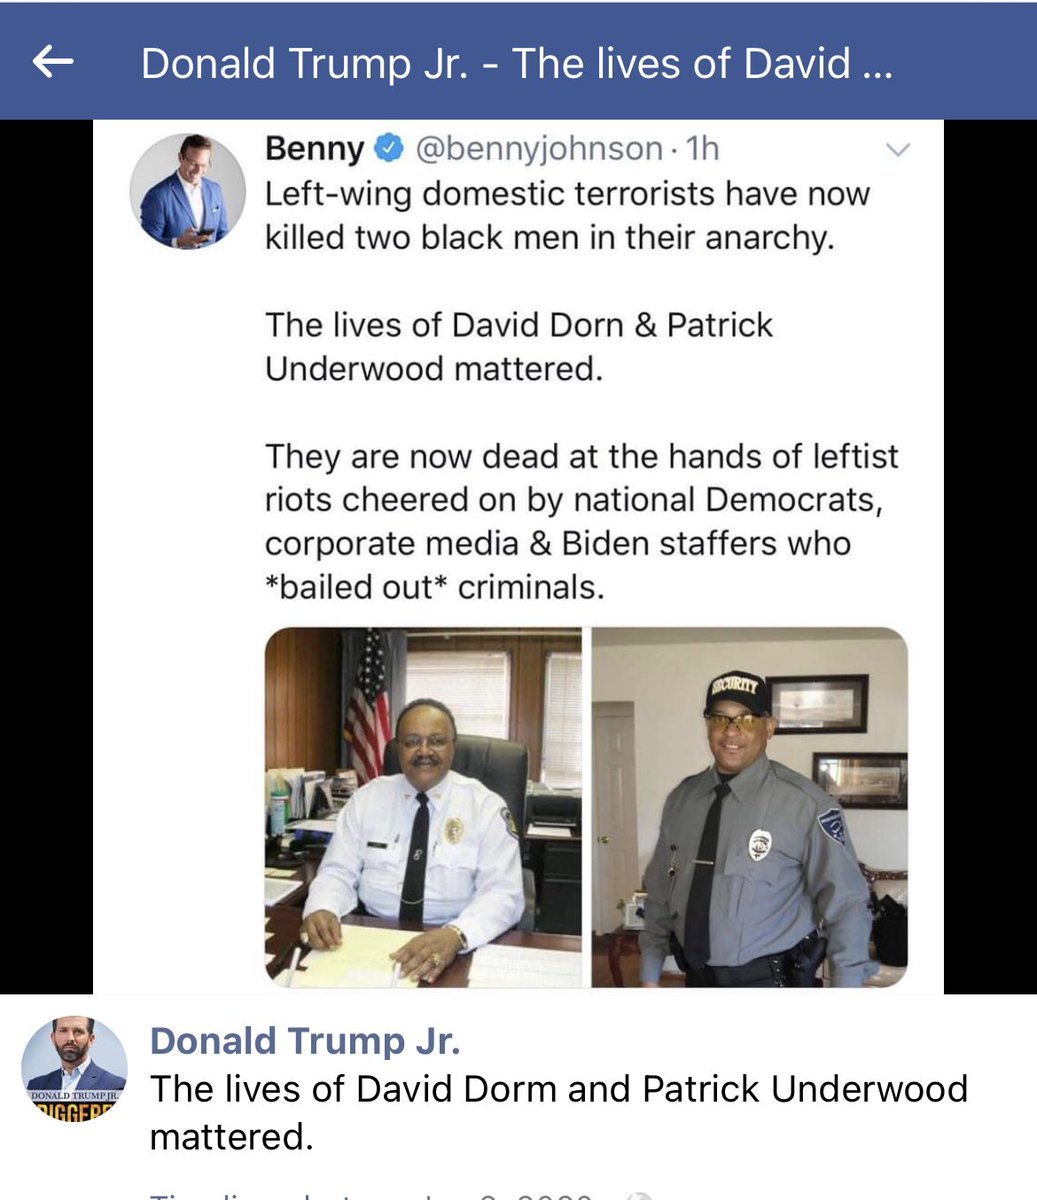 That time @DonaldJTrumpJr and @bennyjohnson falsely accused left wing groups of killing David Patrick Underwood during the George Floyd Protests. Also it wasn’t left wing anything who killed David Dorn. #Antifa https://t.co/ZHAWpkvKMb